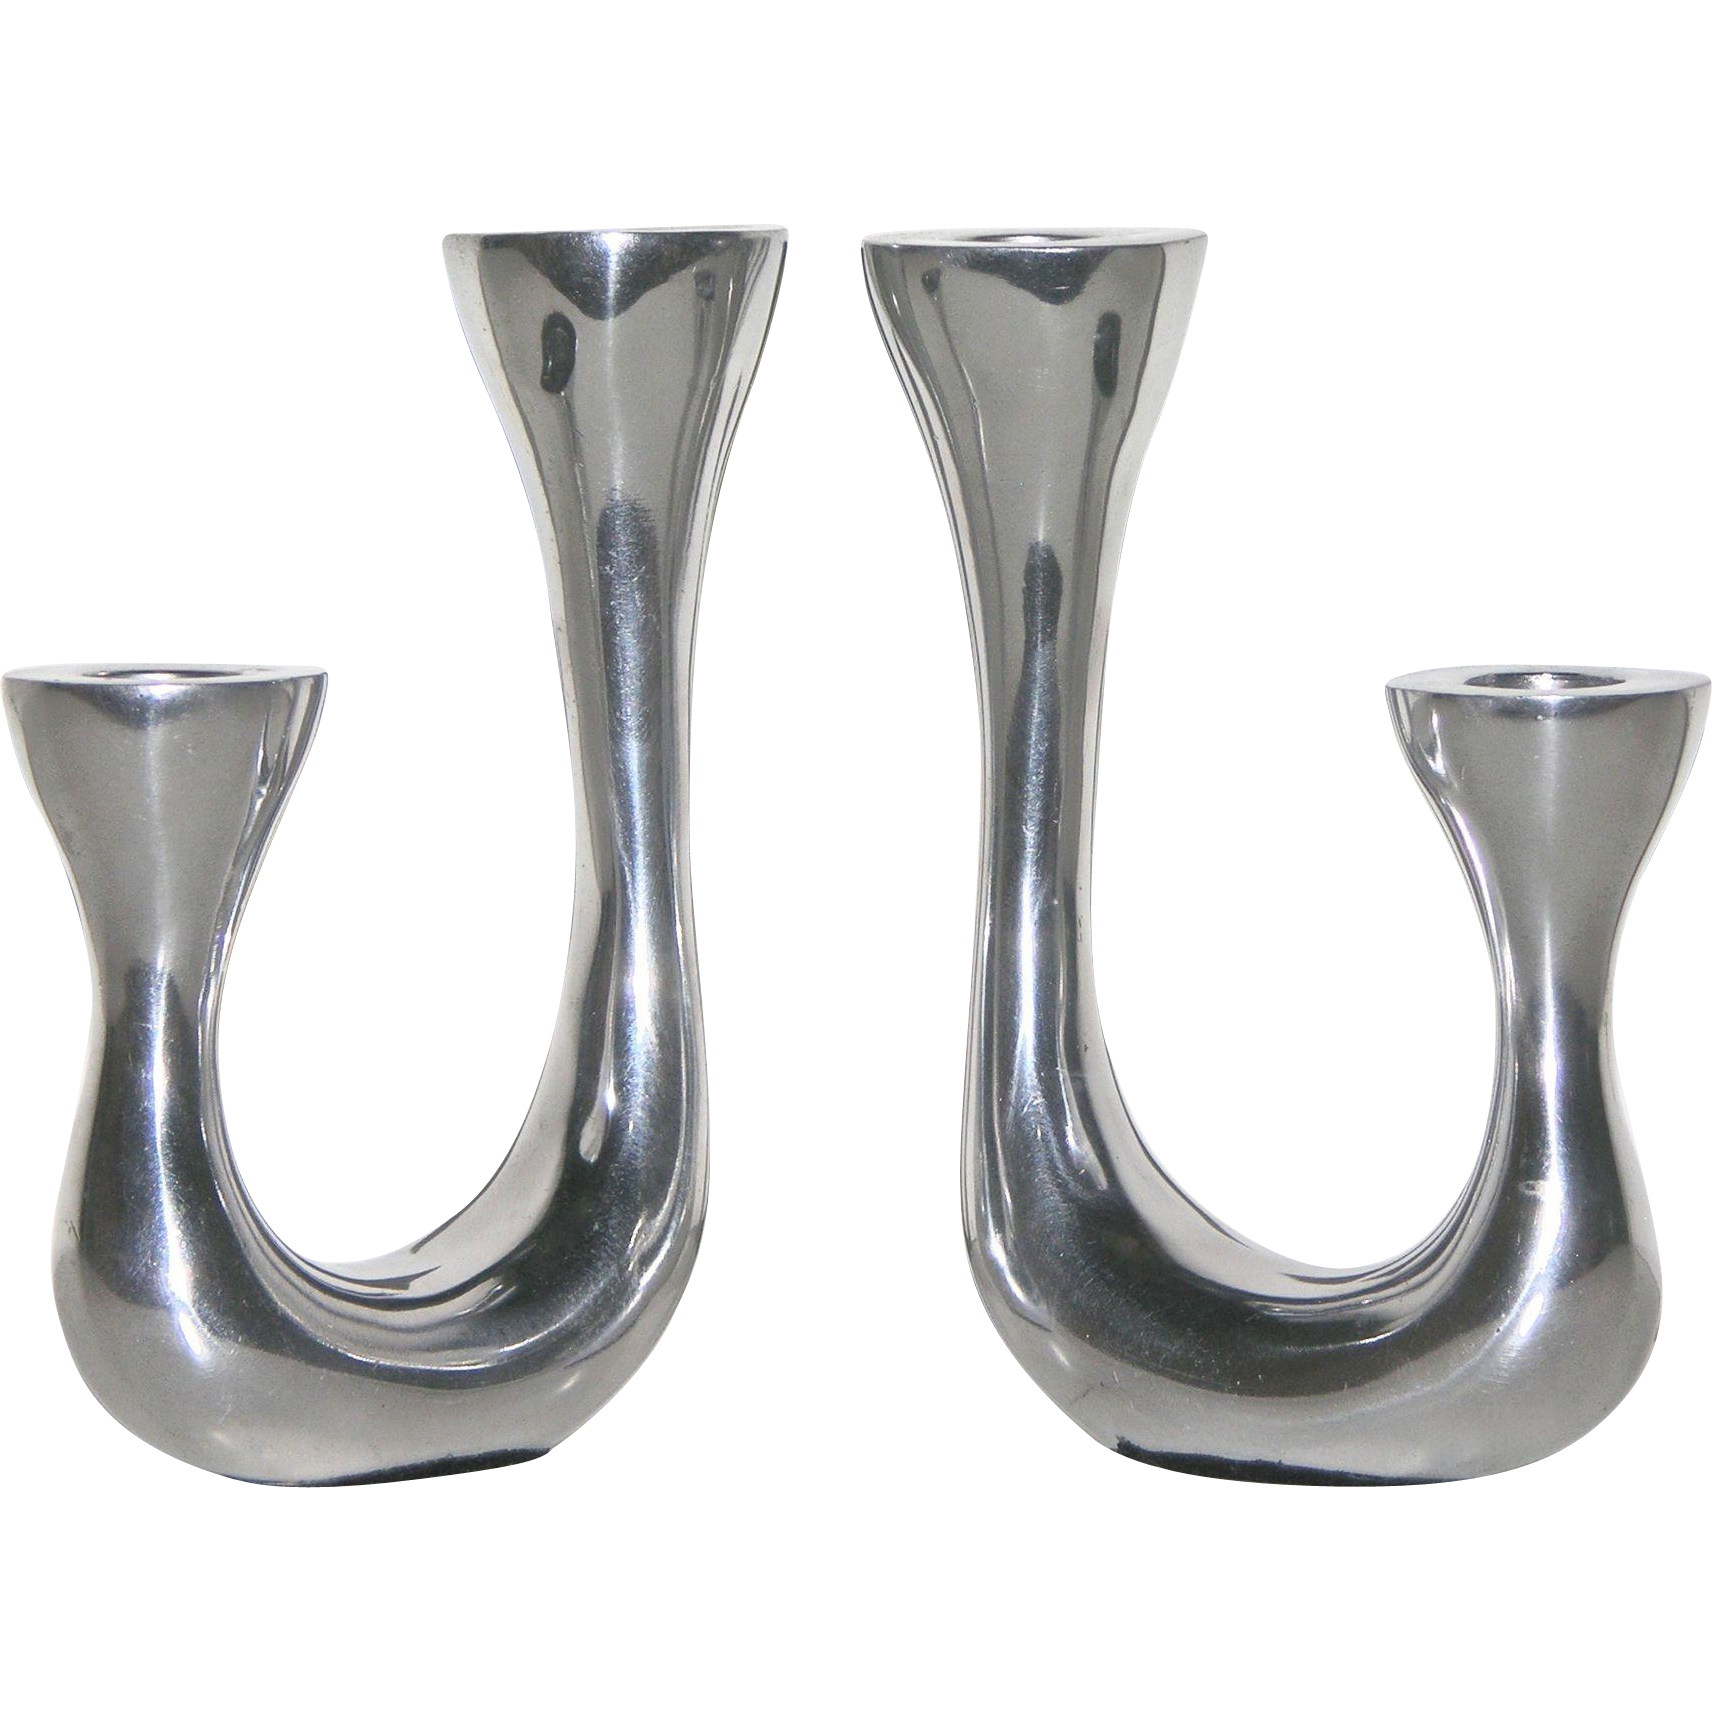 1970s Vintage Italian Pair of Polished Cast Aluminum Modern Candlesticks - Cosulich Interiors & Antiques